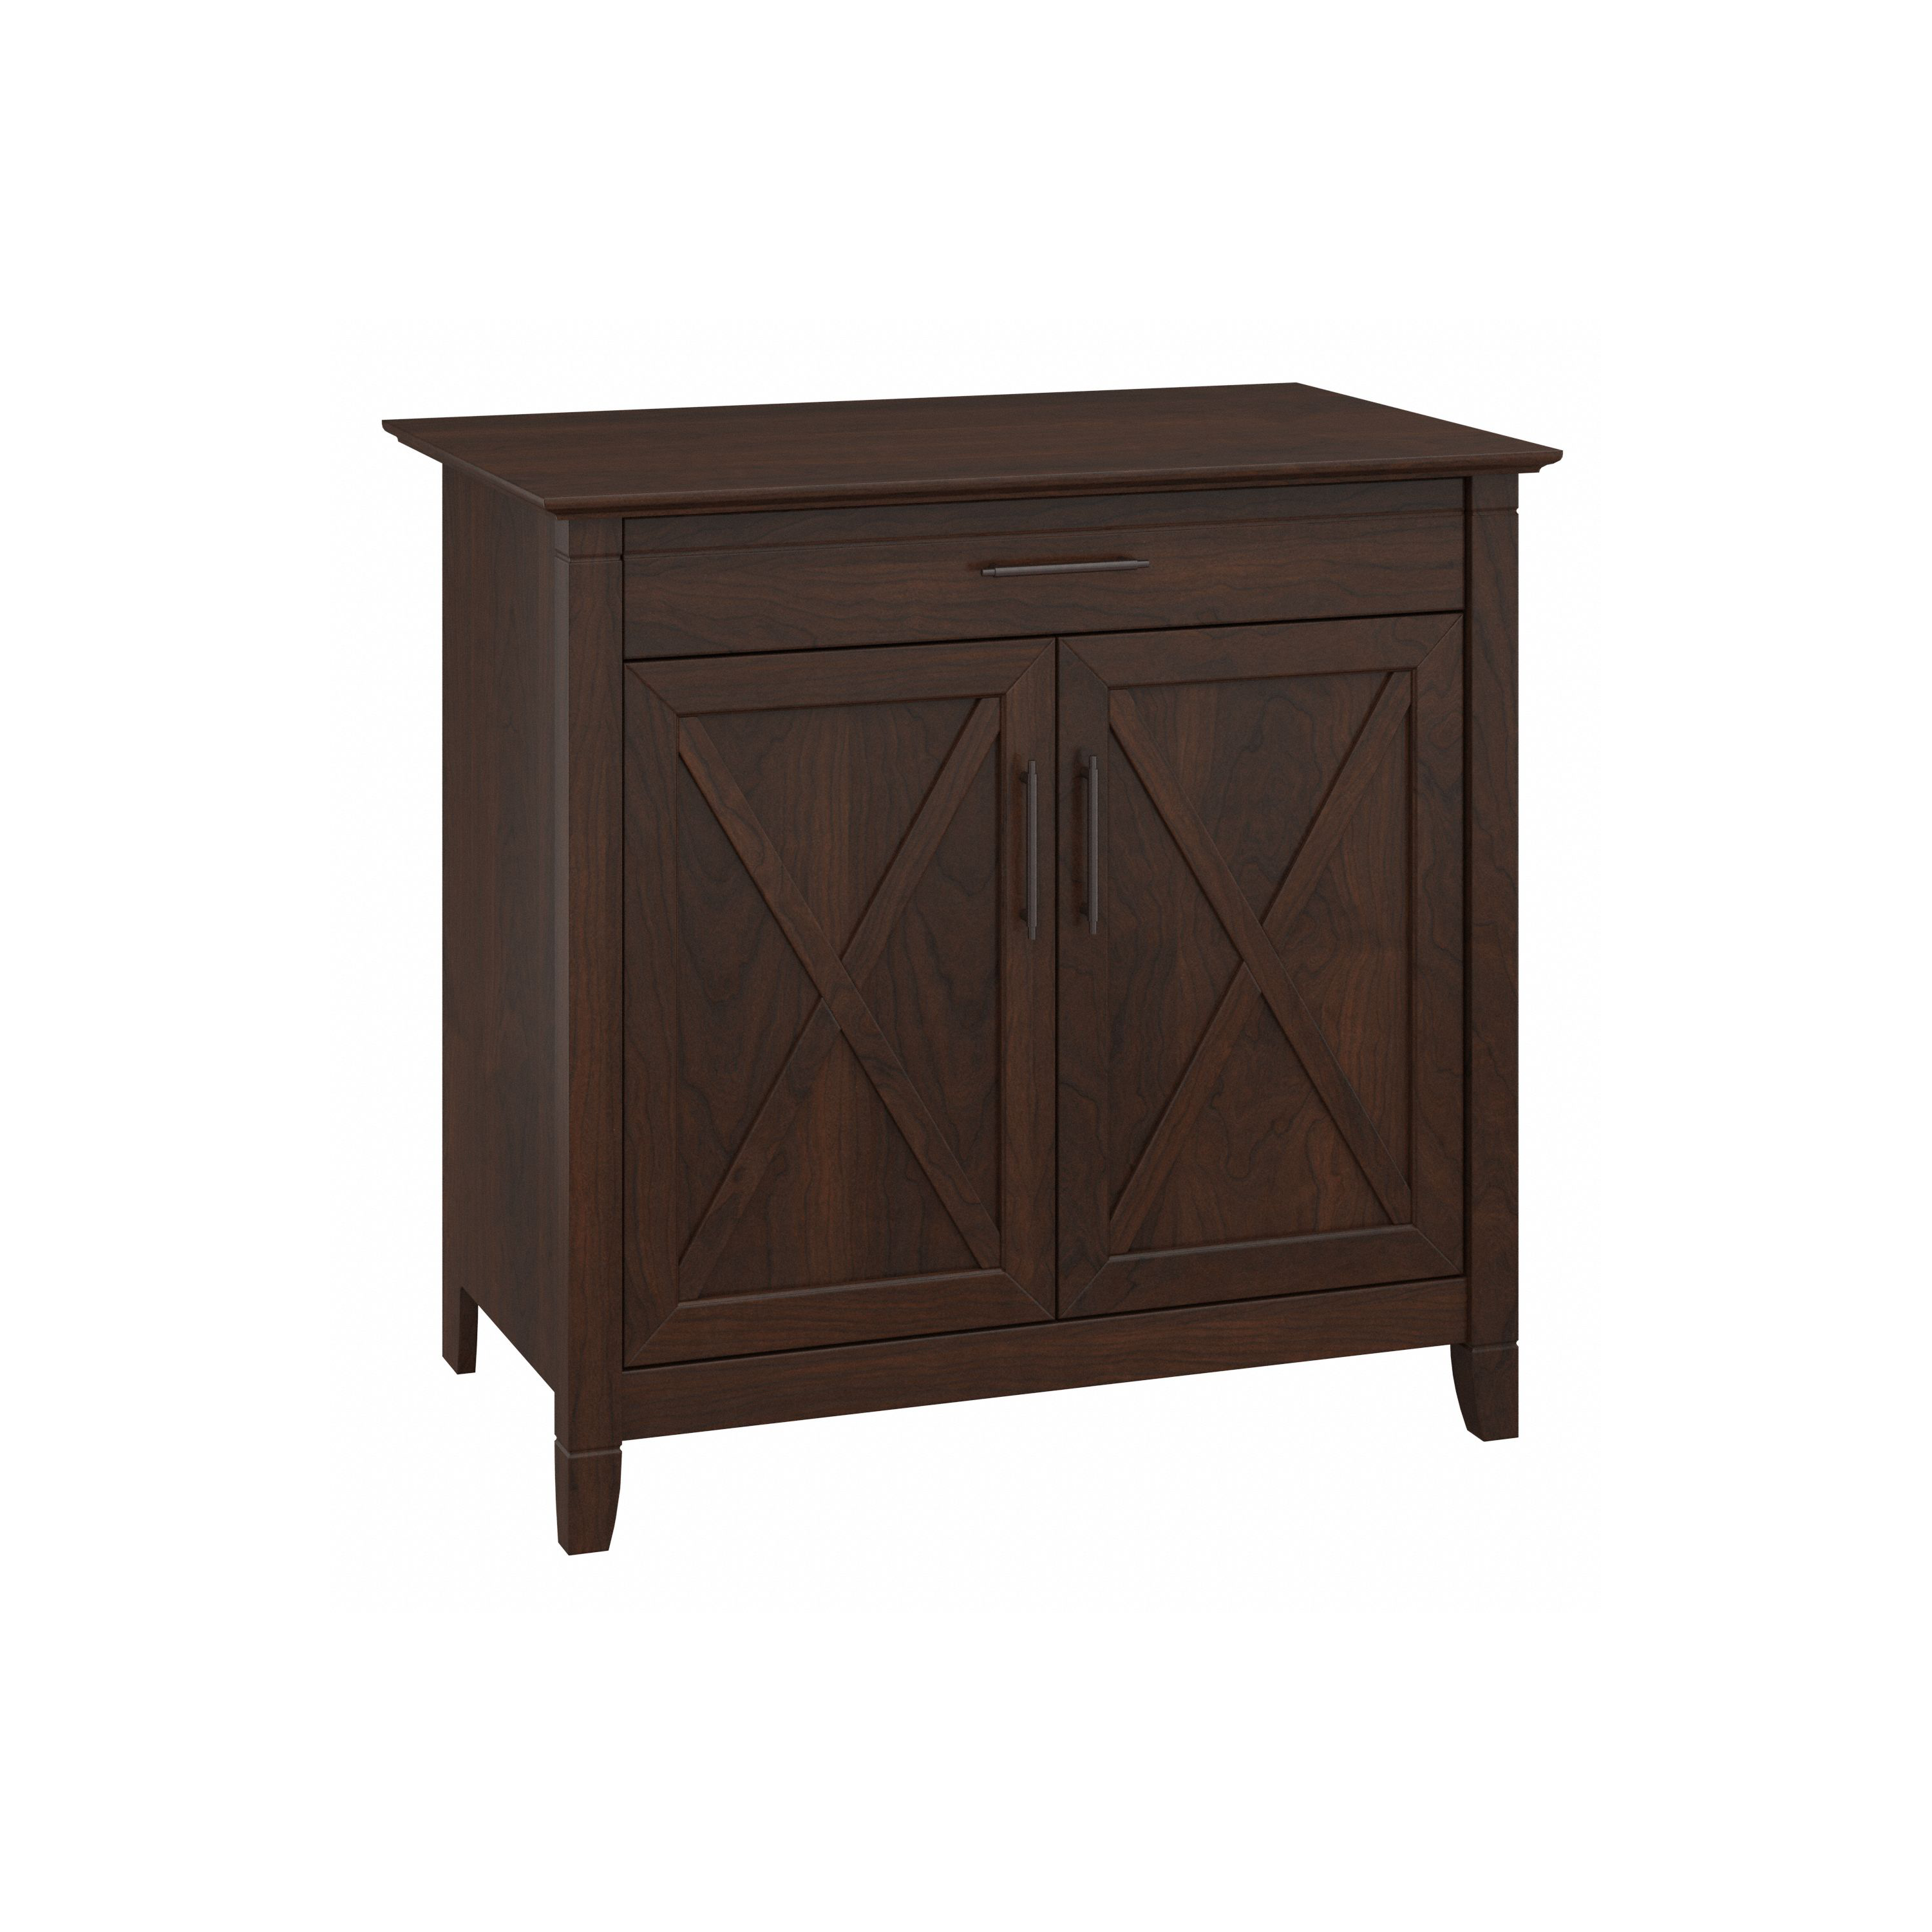 Shop Bush Furniture Key West Secretary Desk with Keyboard Tray and Storage Cabinet 02 KWS132BC-03 #color_bing cherry